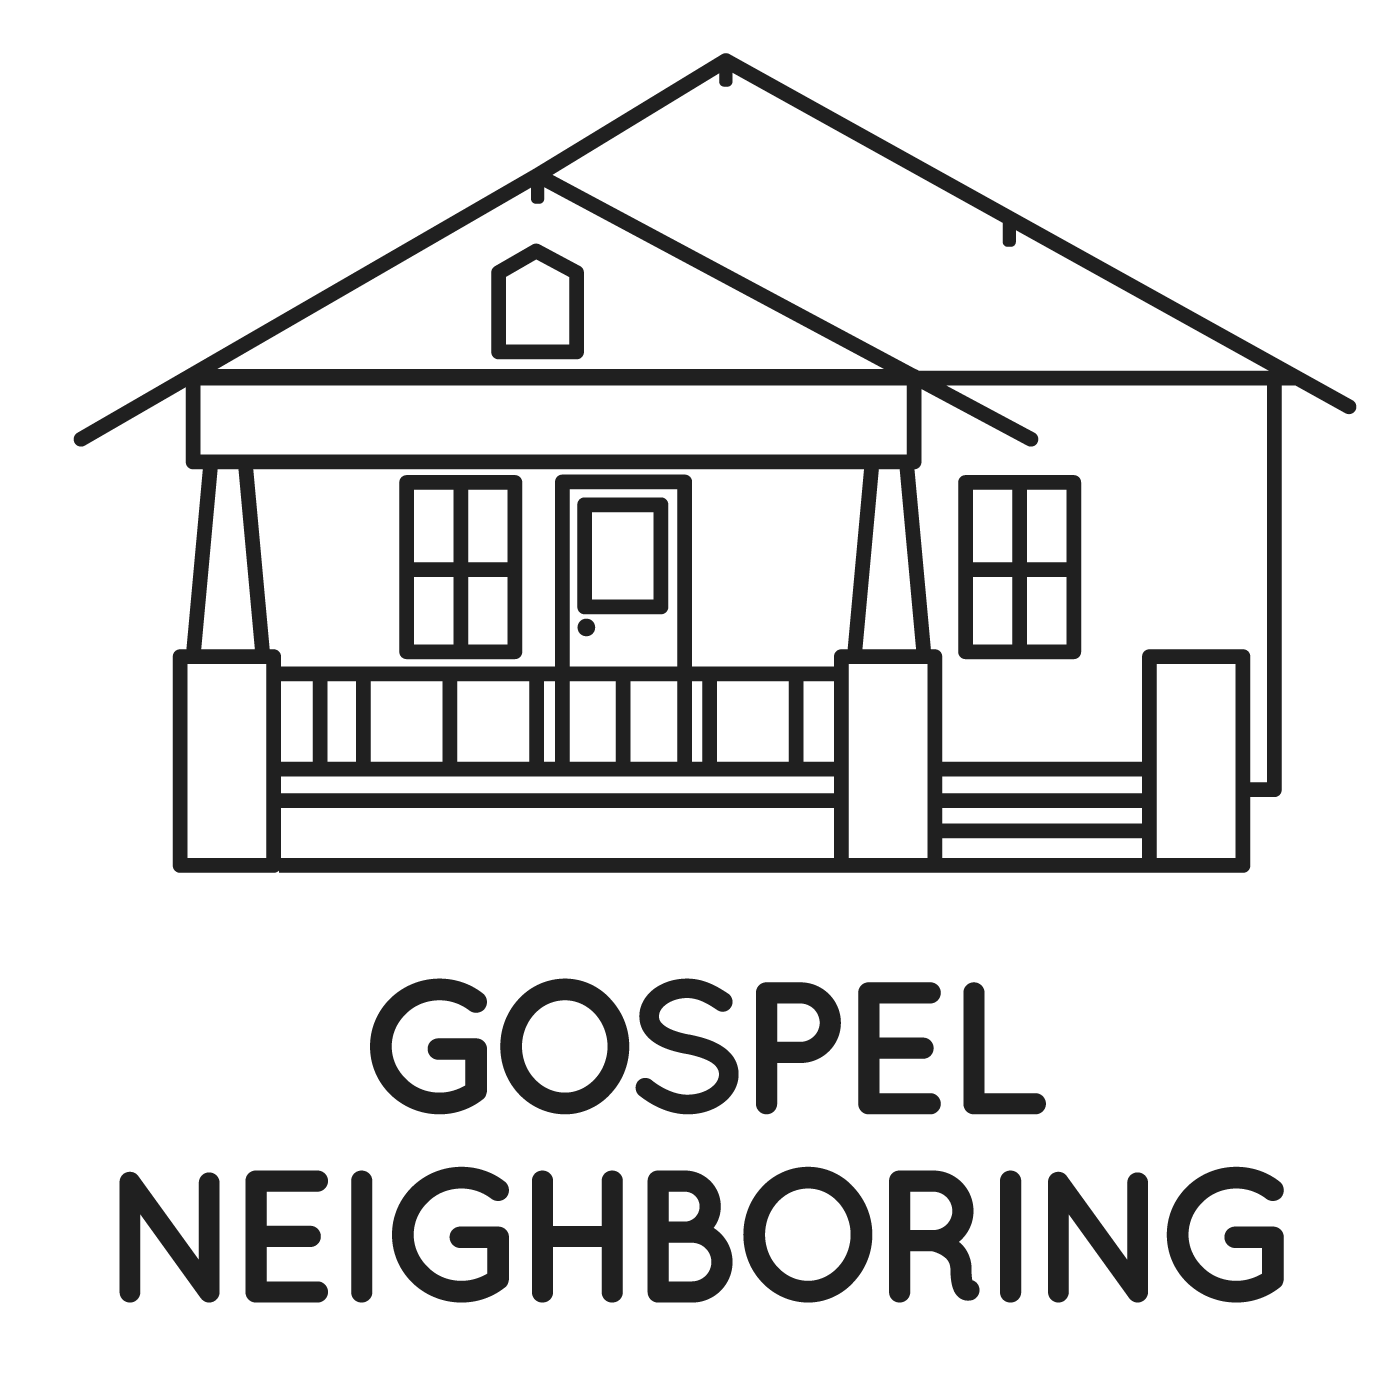 12 Free Gospel Pictures Free Cliparts That You Can Download To You